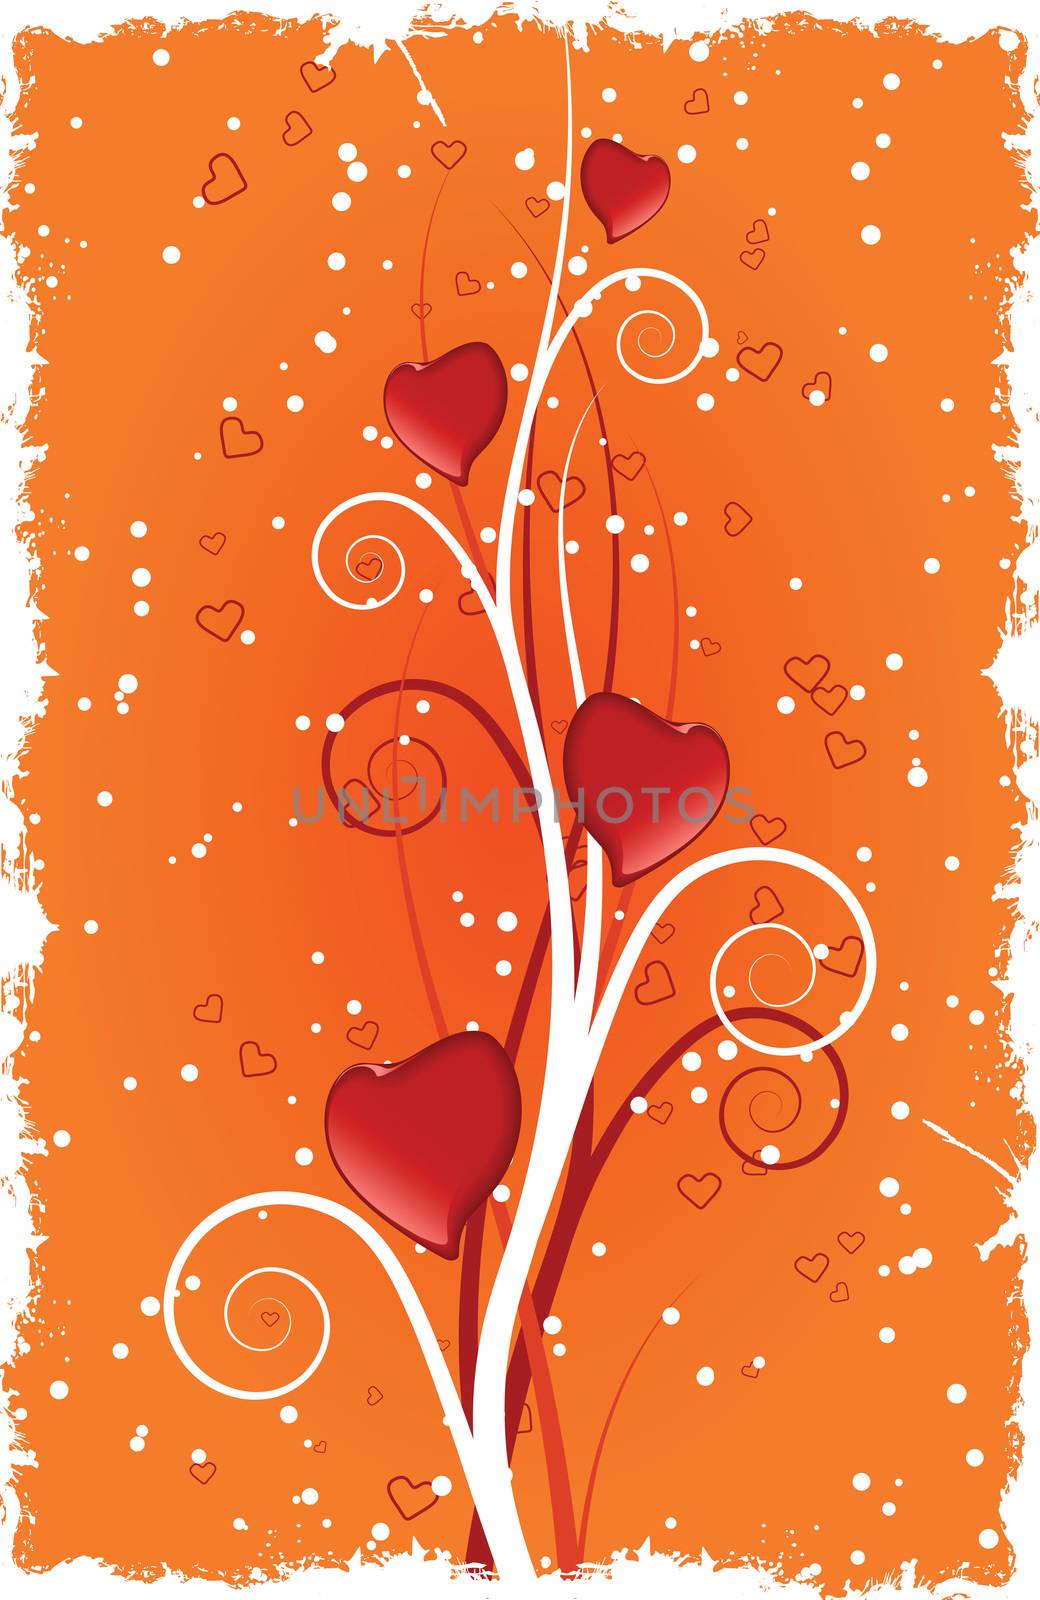 Heart with swirls. Vector illustration by WaD